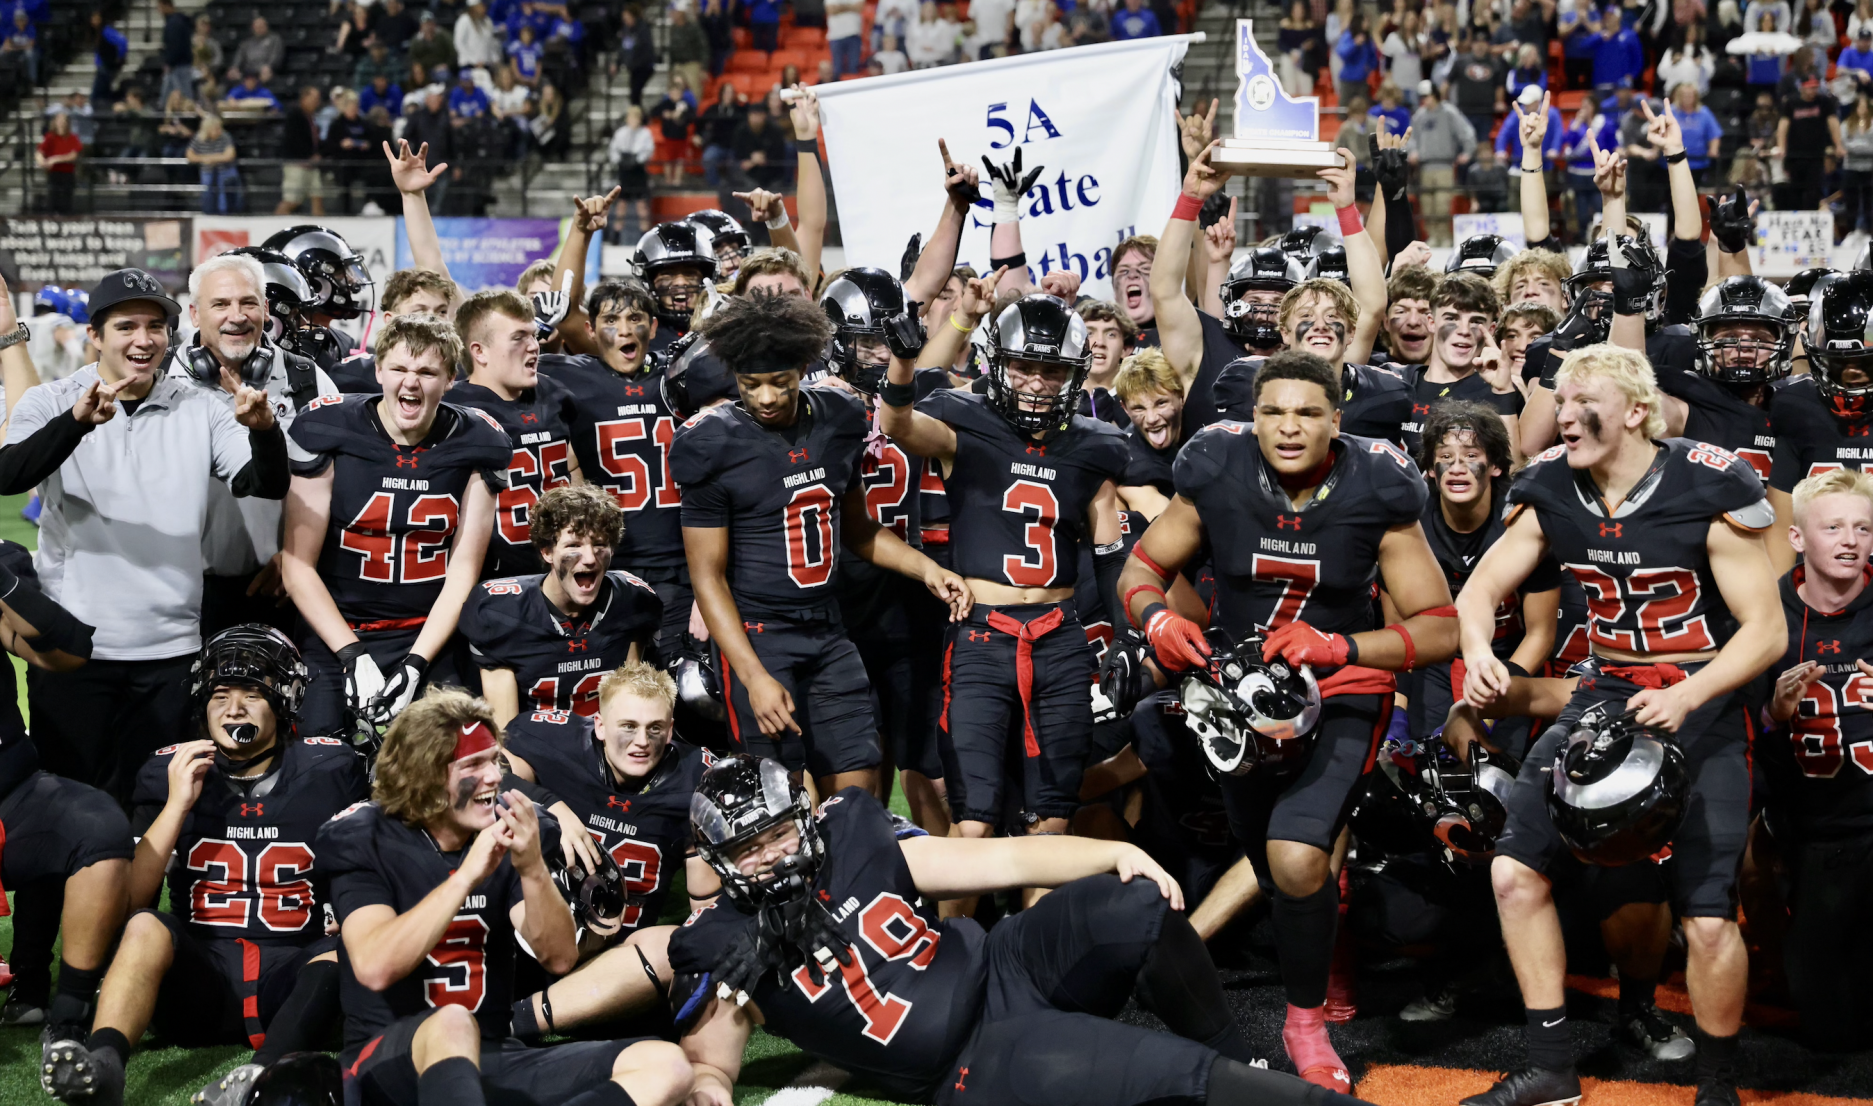 STATE CHAMPS: Highland football team wins state championship game against Coeur d’Alene